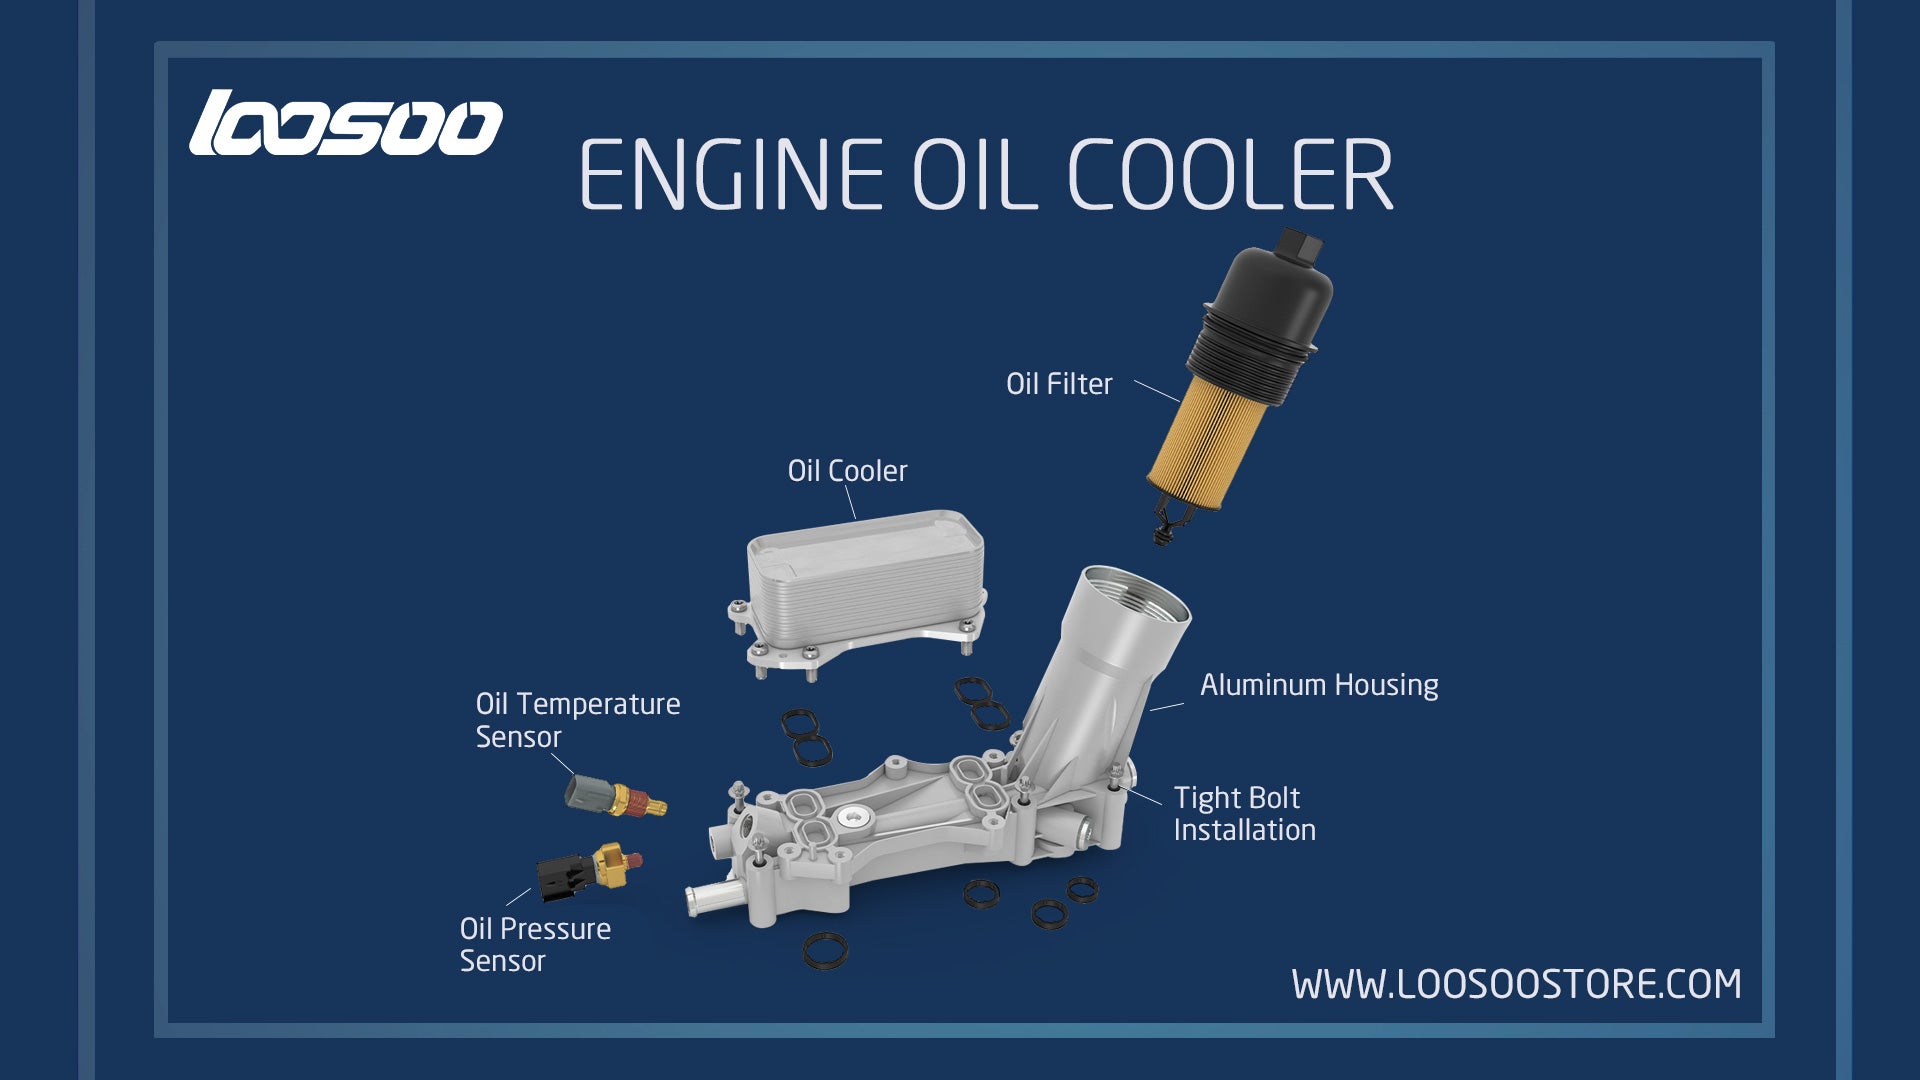 With years of manufacturing experience and a strong commitment to quality, LOOSOO Engine Oil Cooler Assemblies are always in high demand. All of them meet or exceed OEM standards to maintain the better operation of the engine. We offer a full range of quality products that meet the latest automotive requirements while assuring you excellent quality and competitive prices.